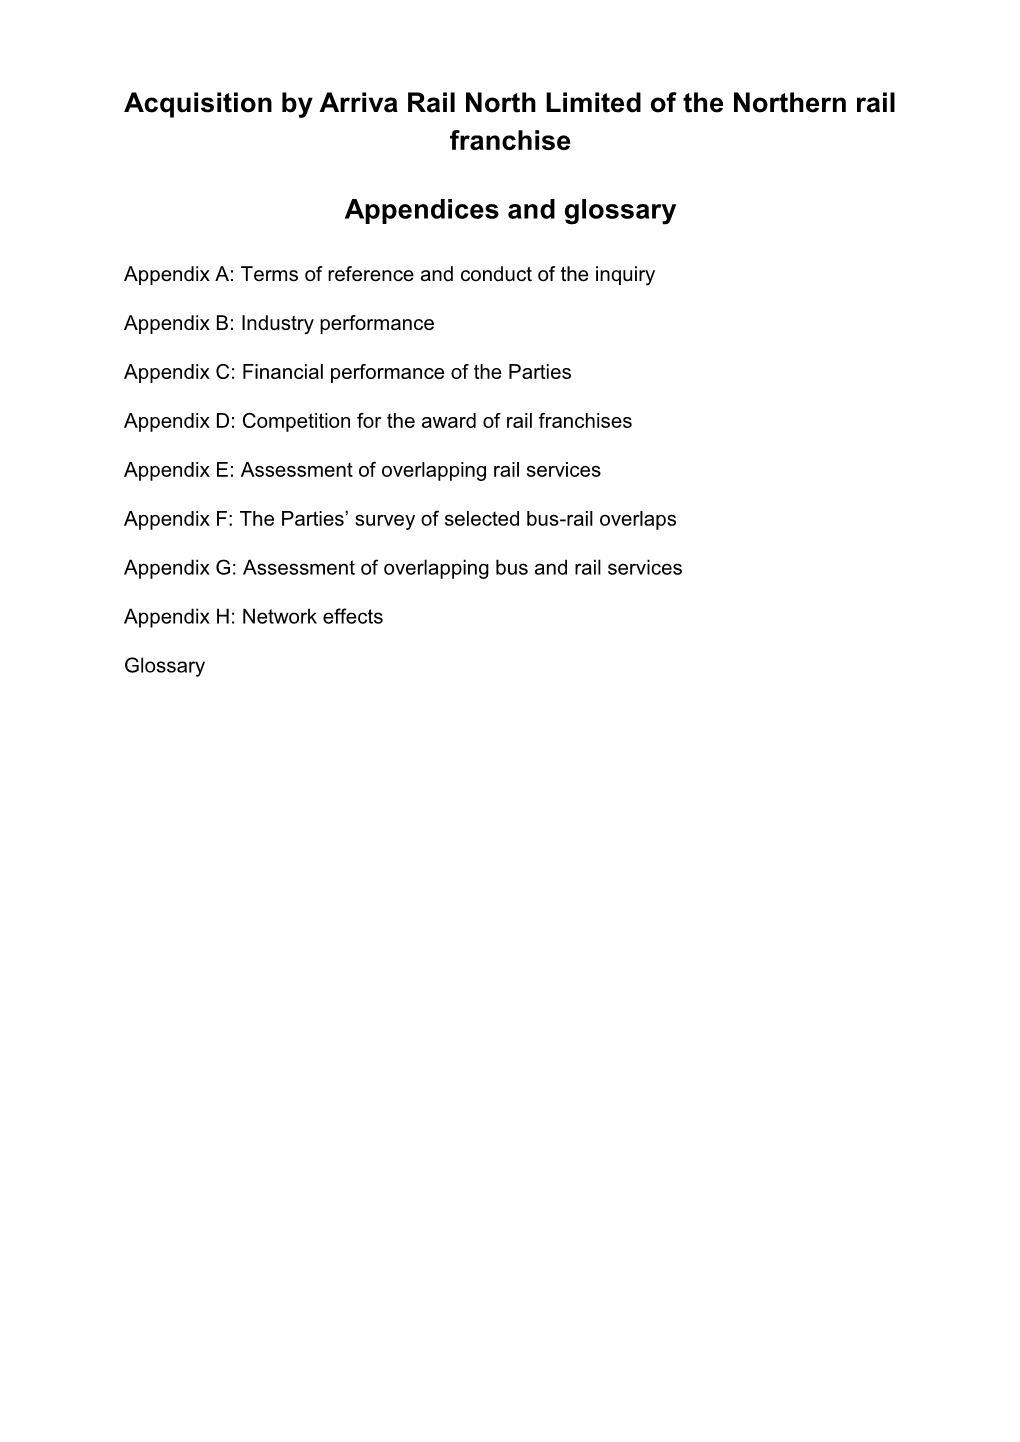 Arriva/Northern: Pfs Appendices and Glossary